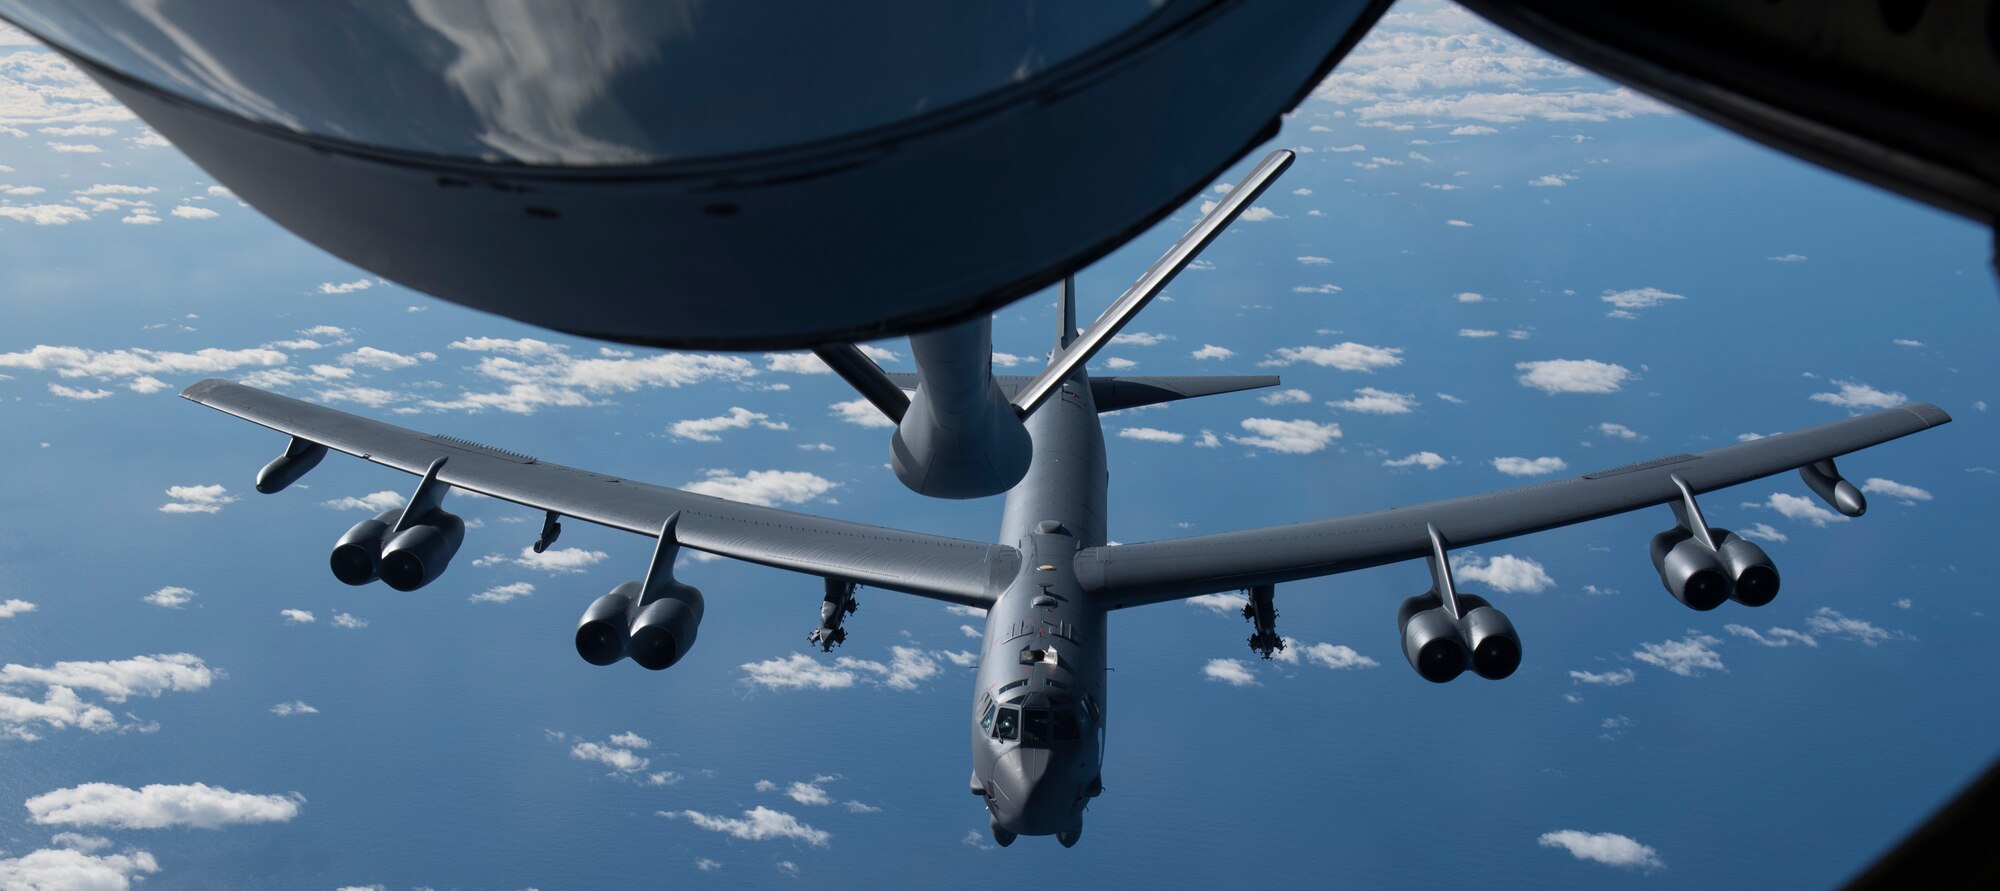 A U.S. Air Force B-52H Stratofortress, assigned to the 69th Expeditionary Bomb Squadron, deployed from Minot Air Force Base, North Dakota, receives fuel from a U.S. Air Force KC-135 Stratotanker assigned to the 191st Air Refuelling Squadron, Wright Air National Guard, Utah, after taking off from Andersen Air Force Base, Guam, Feb. 3, 2020. Continuous Bomber Presence deployments provide opportunities to advance and strengthen alliances, as well as strengthen long-standing military-to-military partnerships. (U.S. Air Force photo Airman 1st Class Helena Owens)